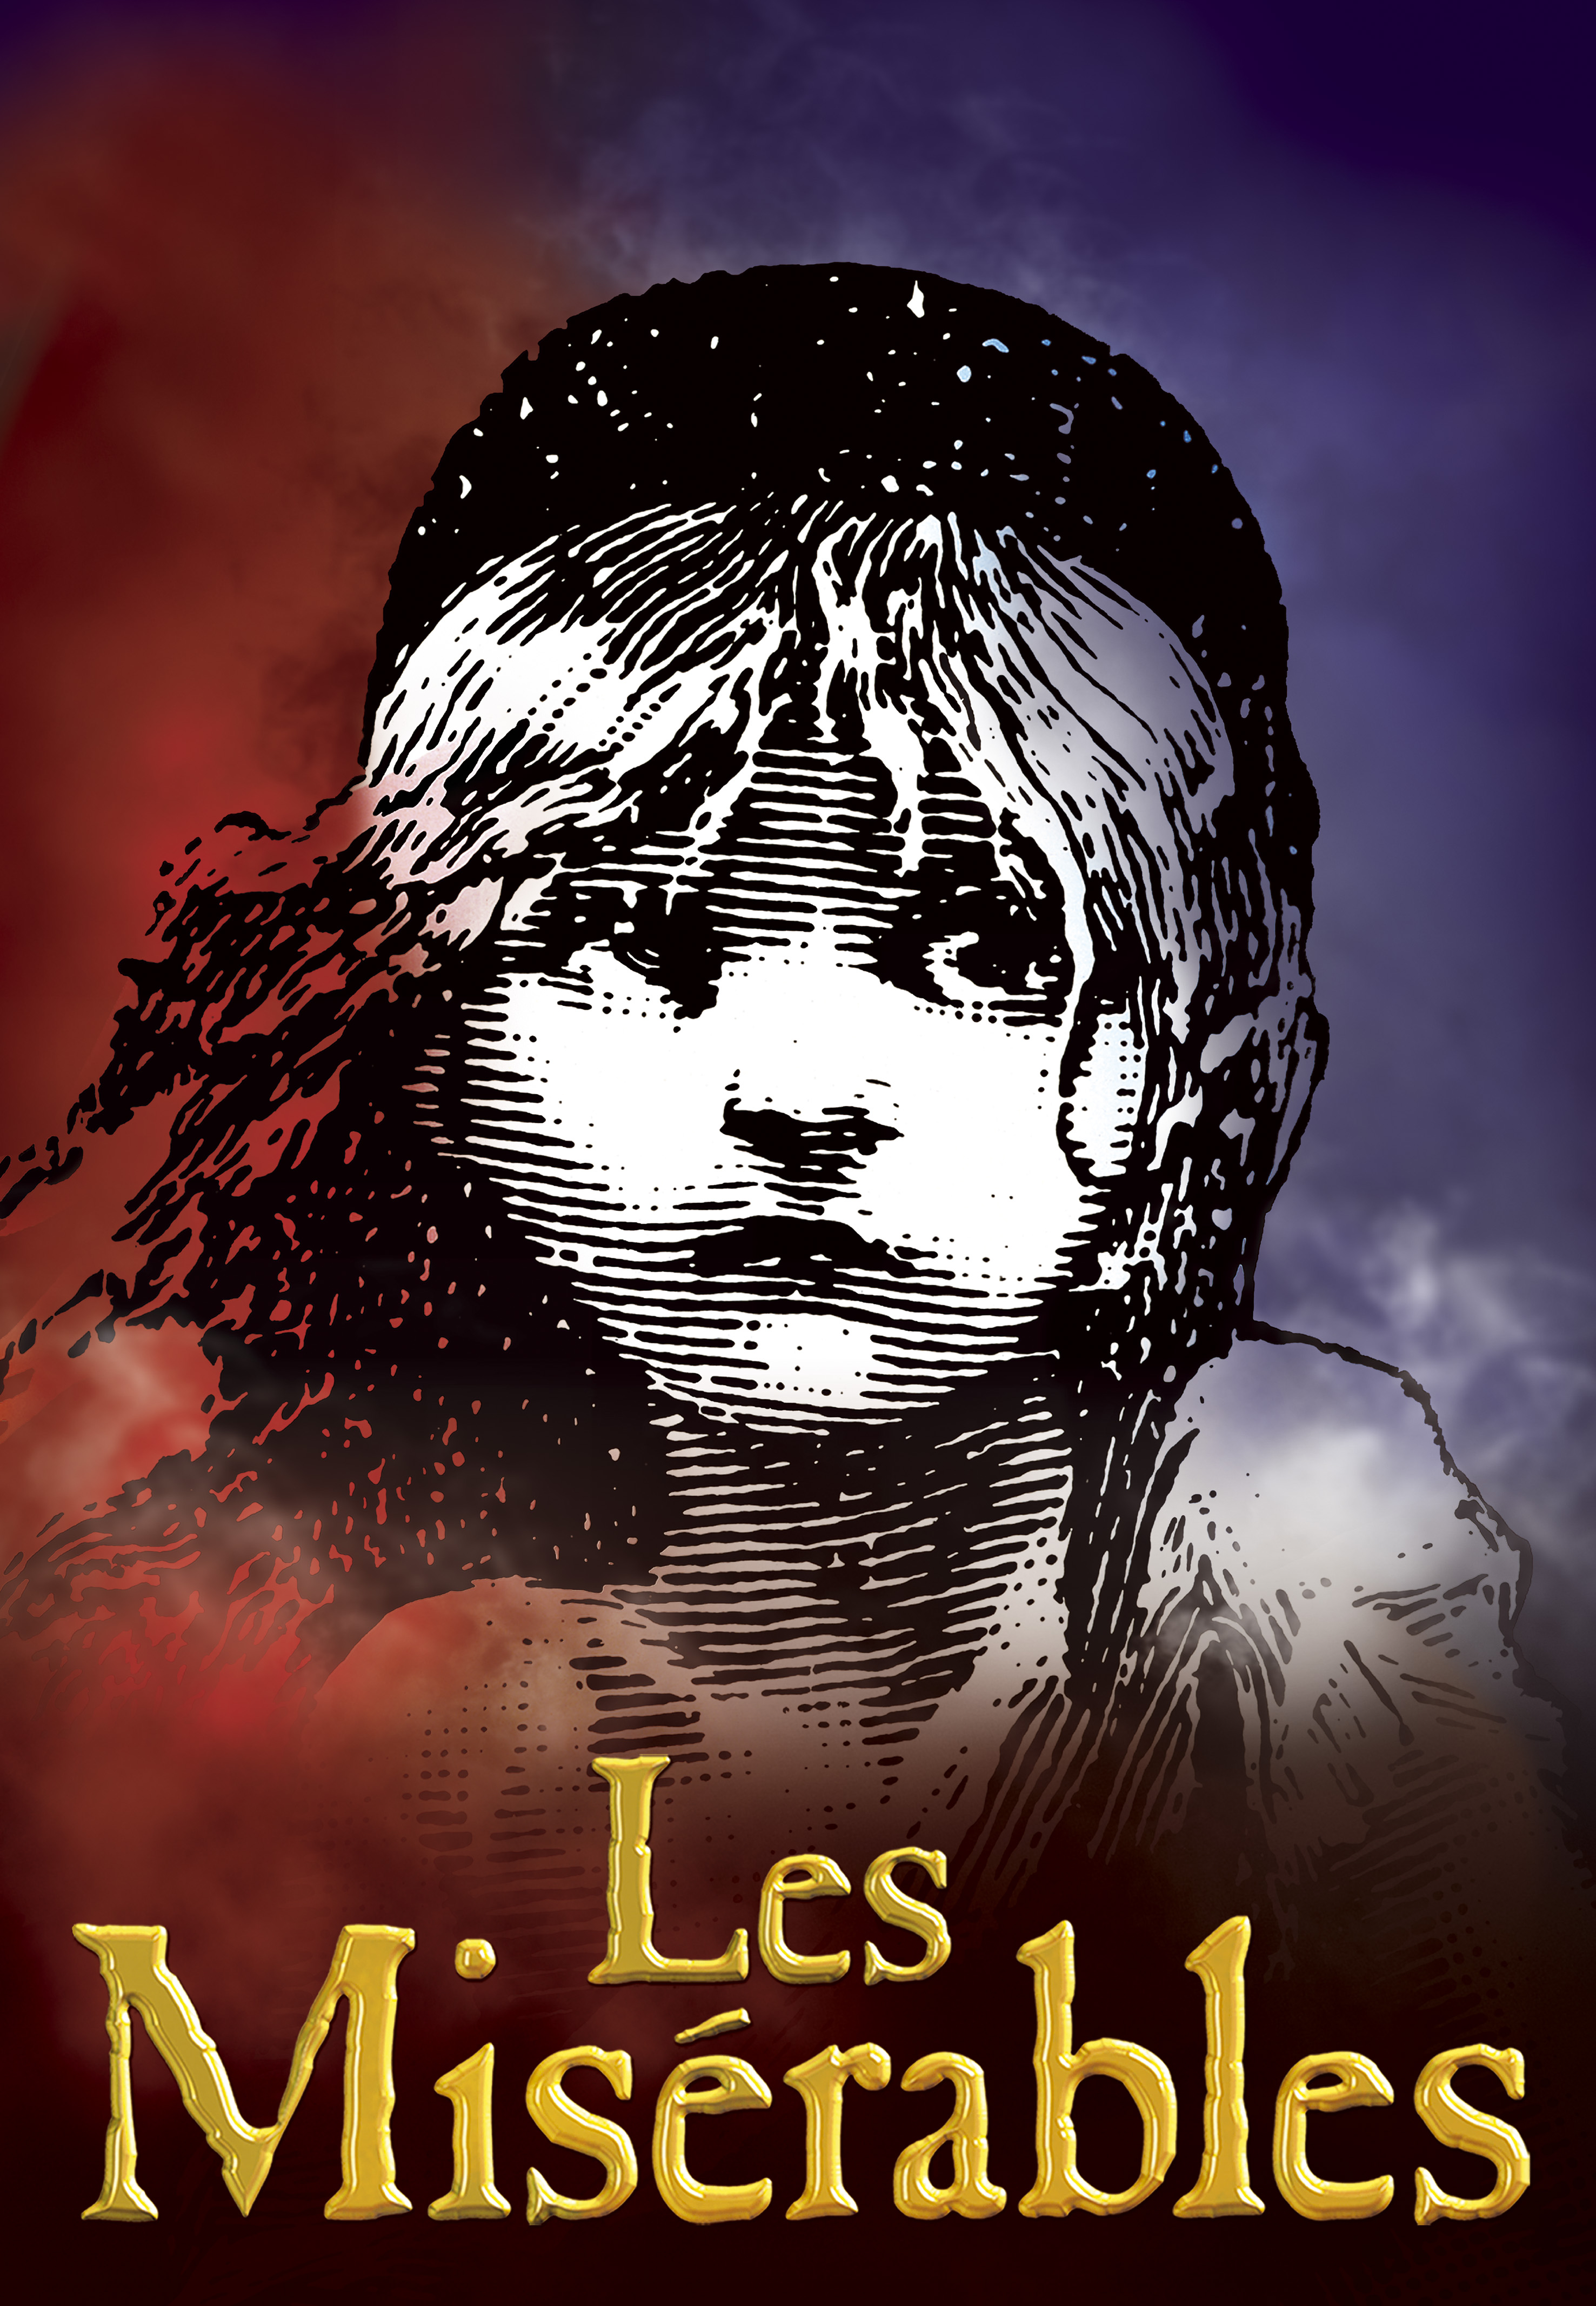 Jesus And Les Miserables Mike Rivage Seul 39 S Blog Quot About